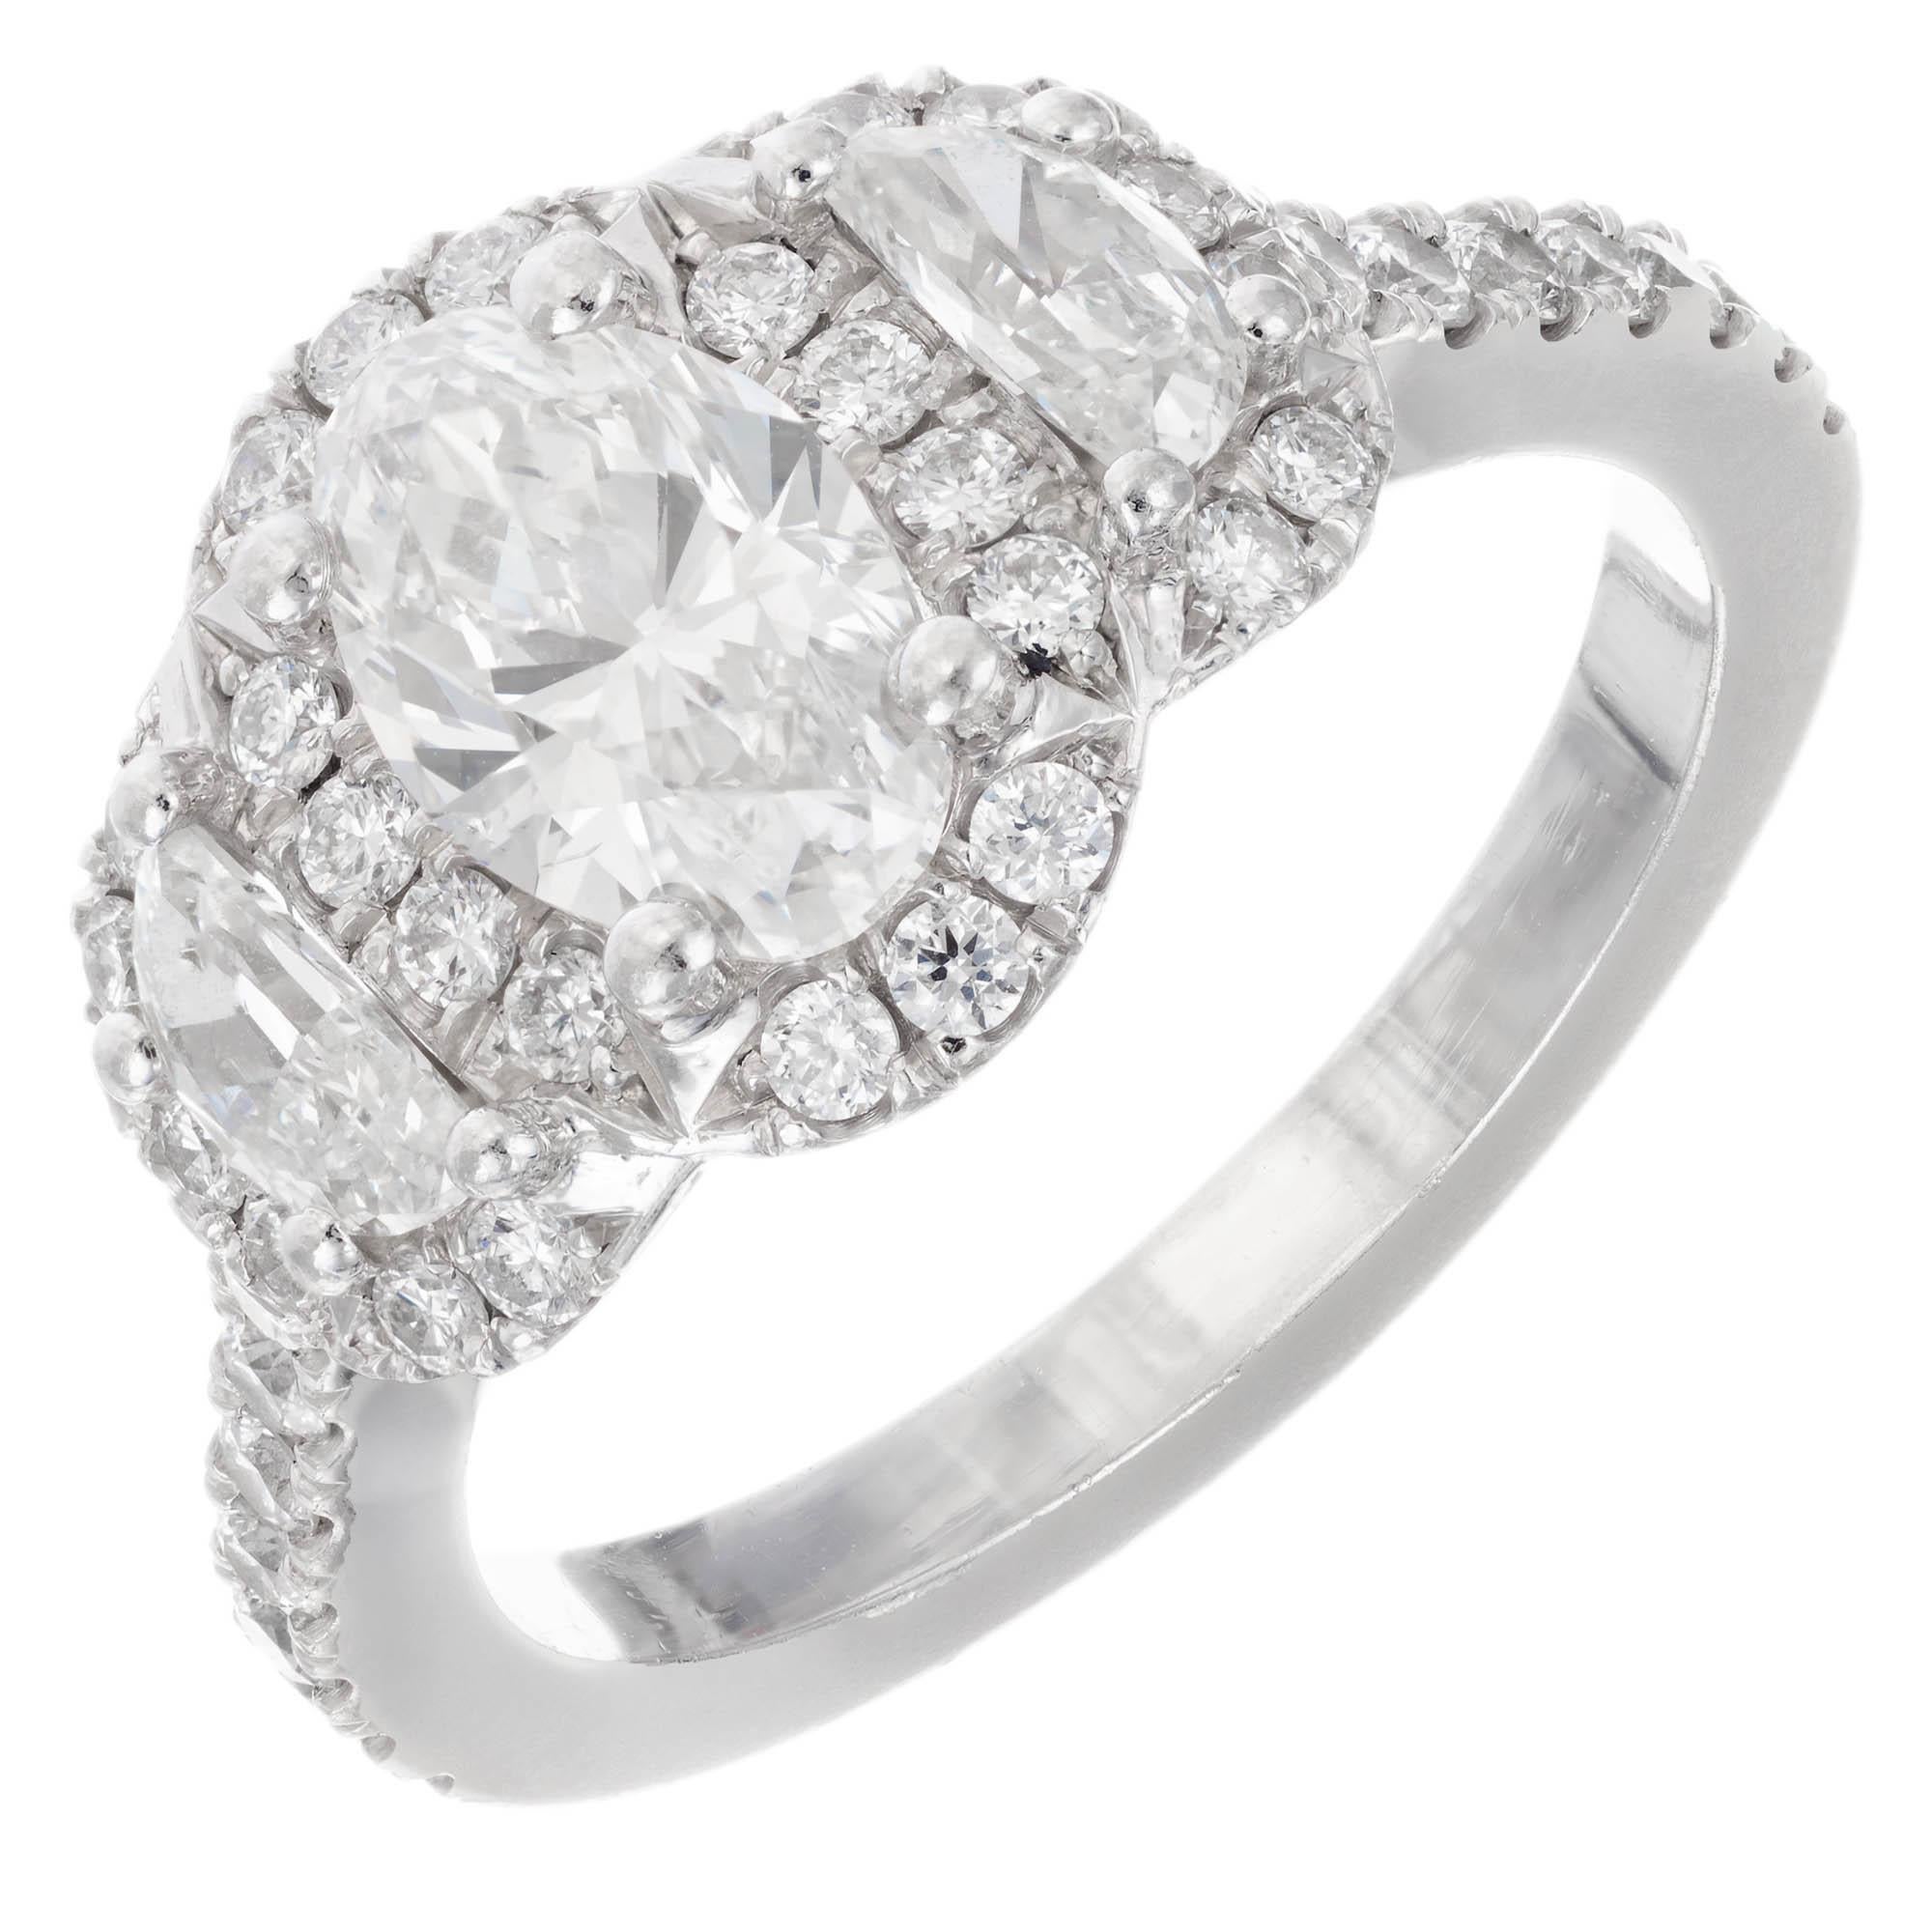 Stunning oval diamond and half-moon triple halo three-stone engagement ring. GIA certified, near colorless, Ideal oval brilliant cut center diamond with half-moon side diamonds. All three stones have a triple halo top. The crown of the ring is